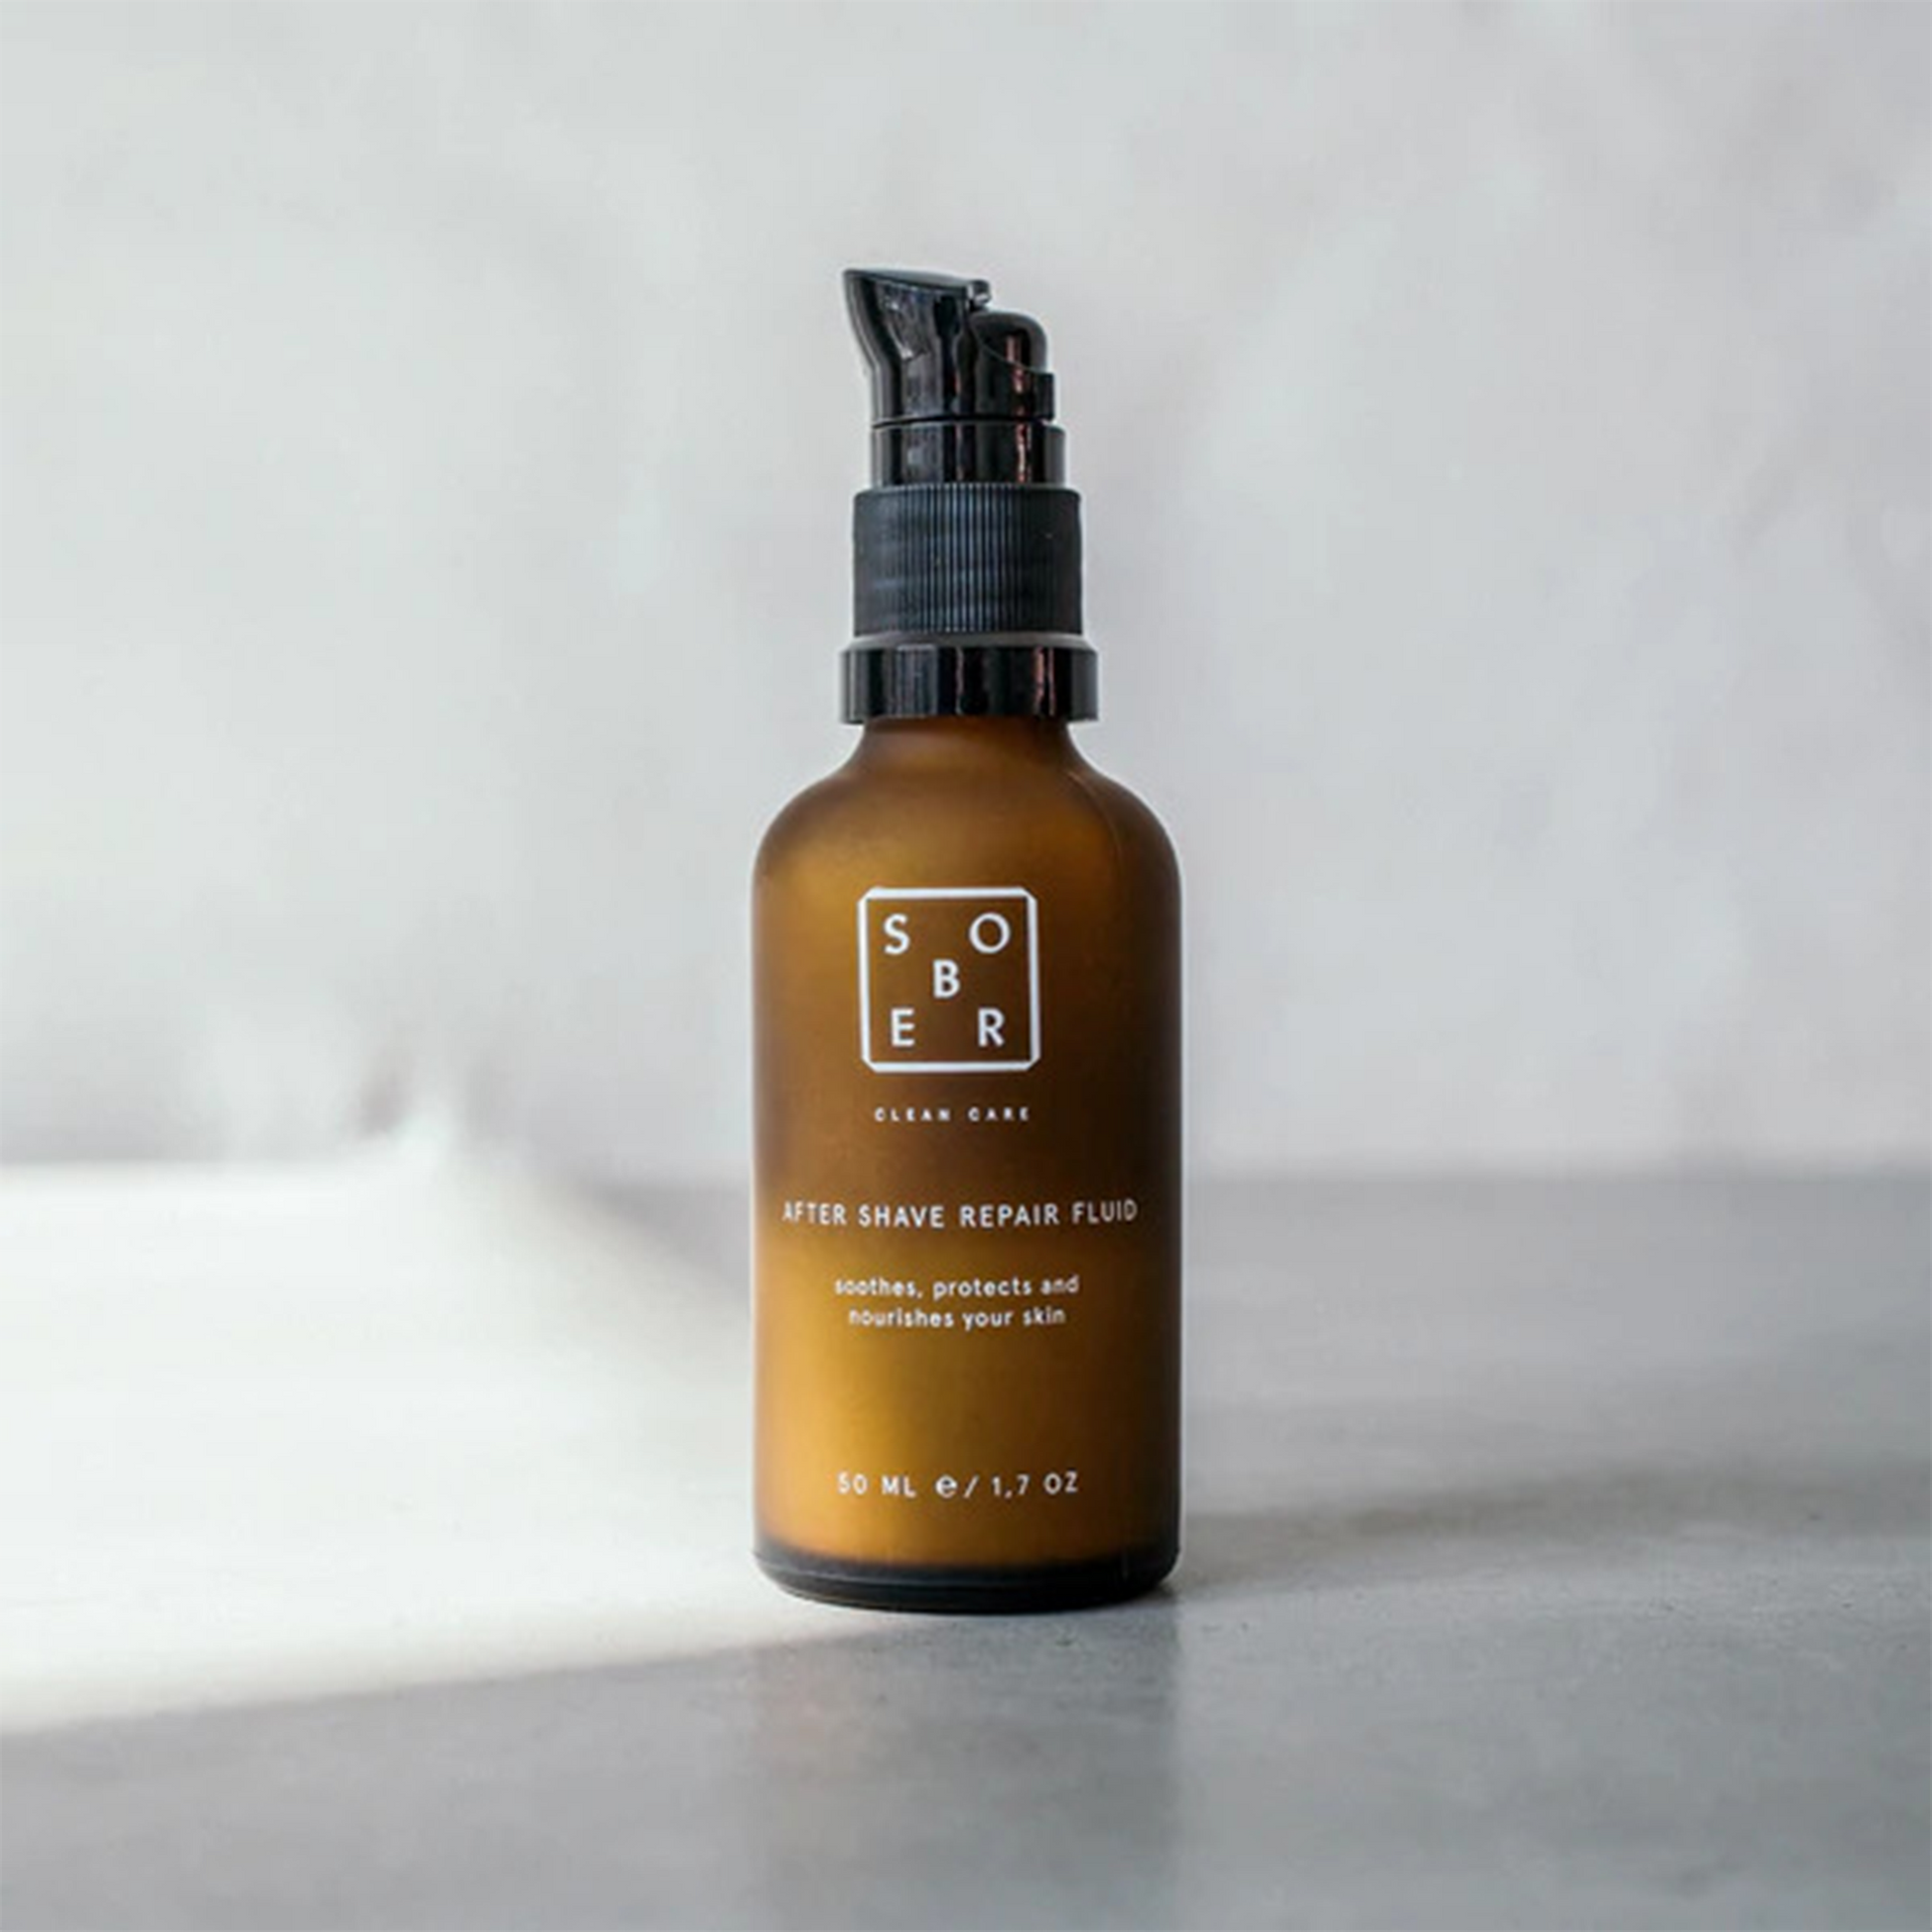 Sober After Shave Repair Fluid: Soothes, protects and cares for the skin after shaving.